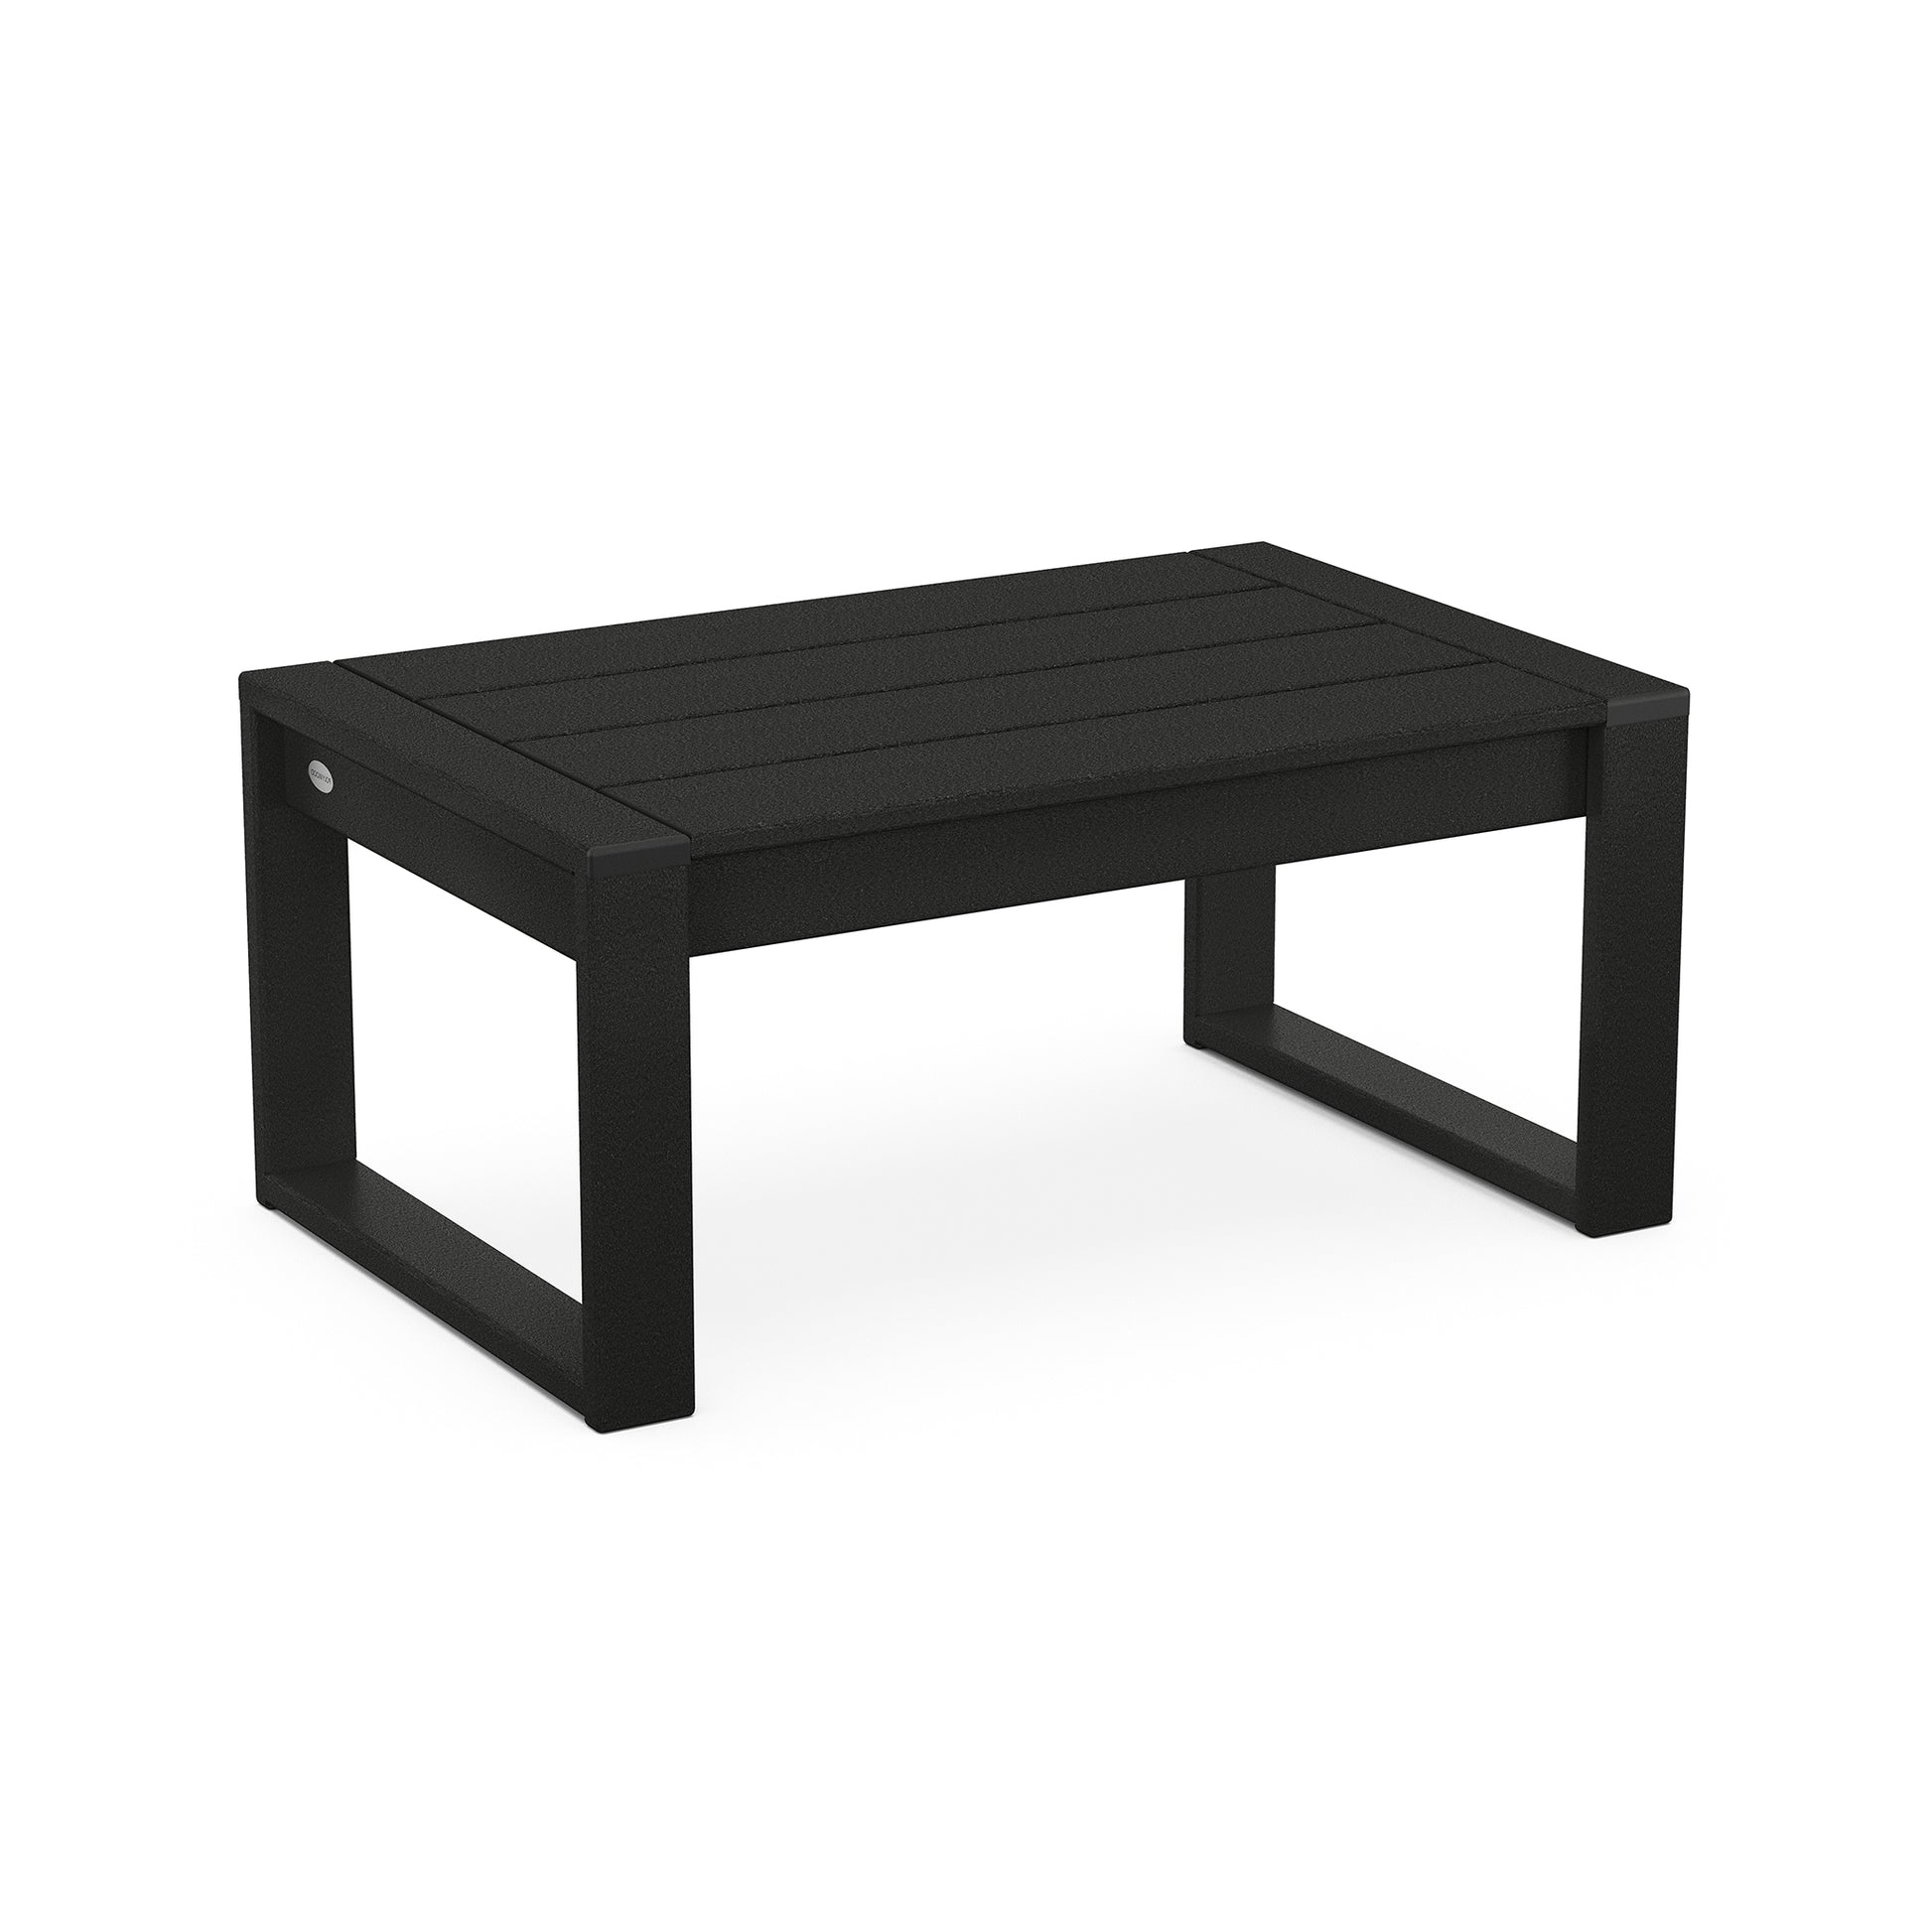 A modern black POLYWOOD EDGE Coffee Table with a slatted top design and a rectangular shape, crafted from durable POLYWOOD lumber, displayed on a white background.